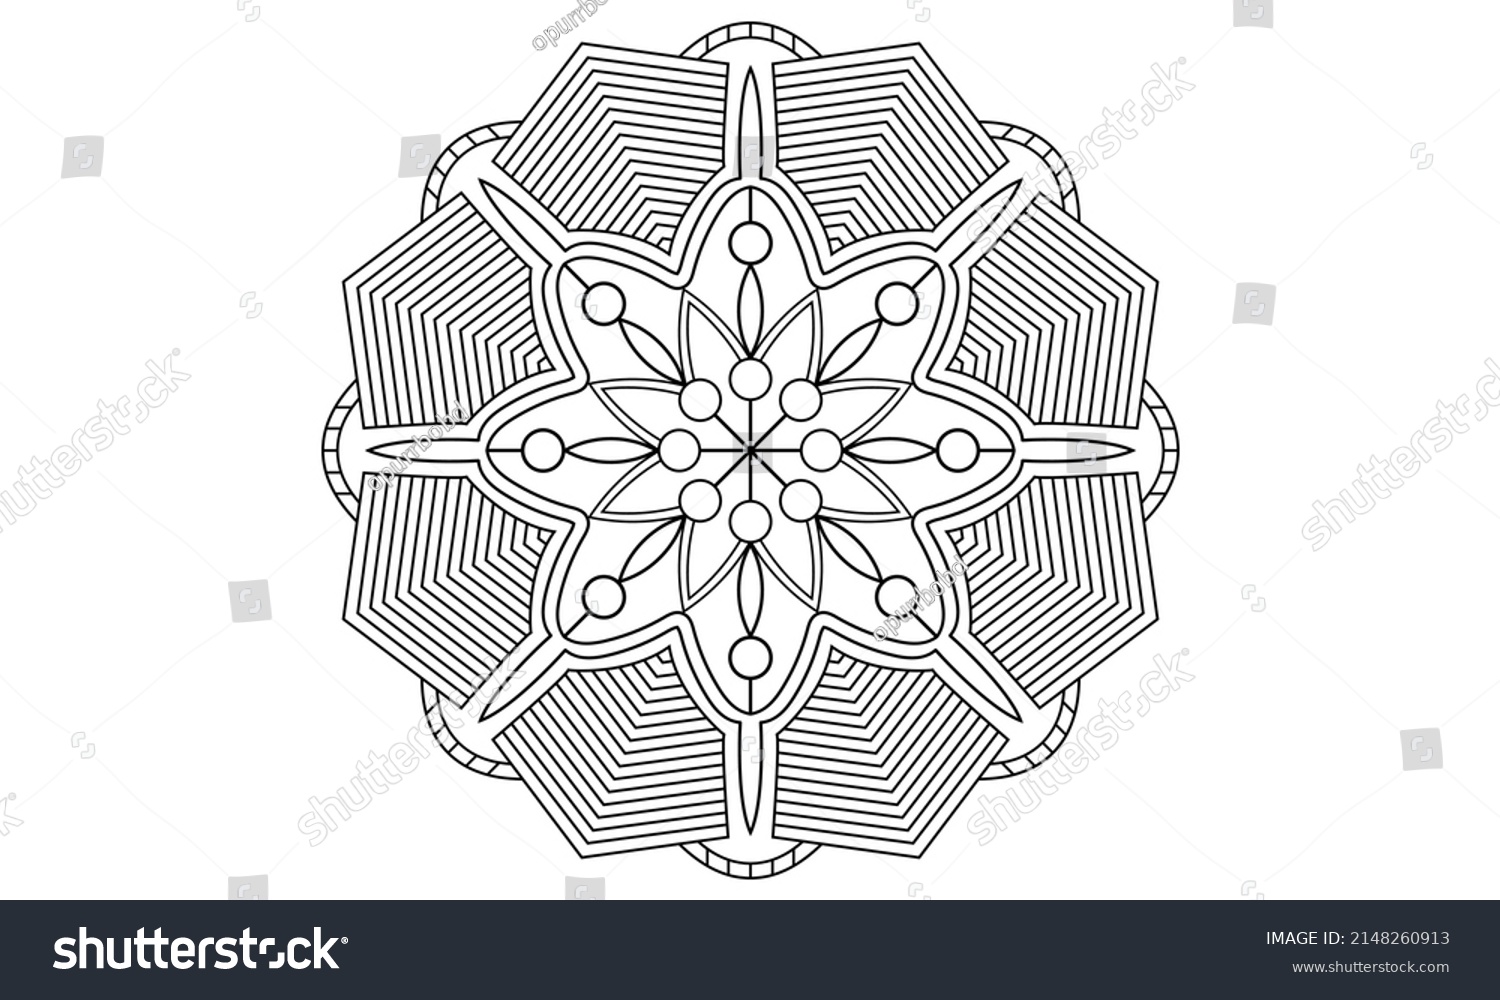 SVG of Luxury mandala background and arabesque pattern Arabic Islamic east style. decorative mandala for print, cover, poster, banner, brochure, and flyer, EPS 10 svg